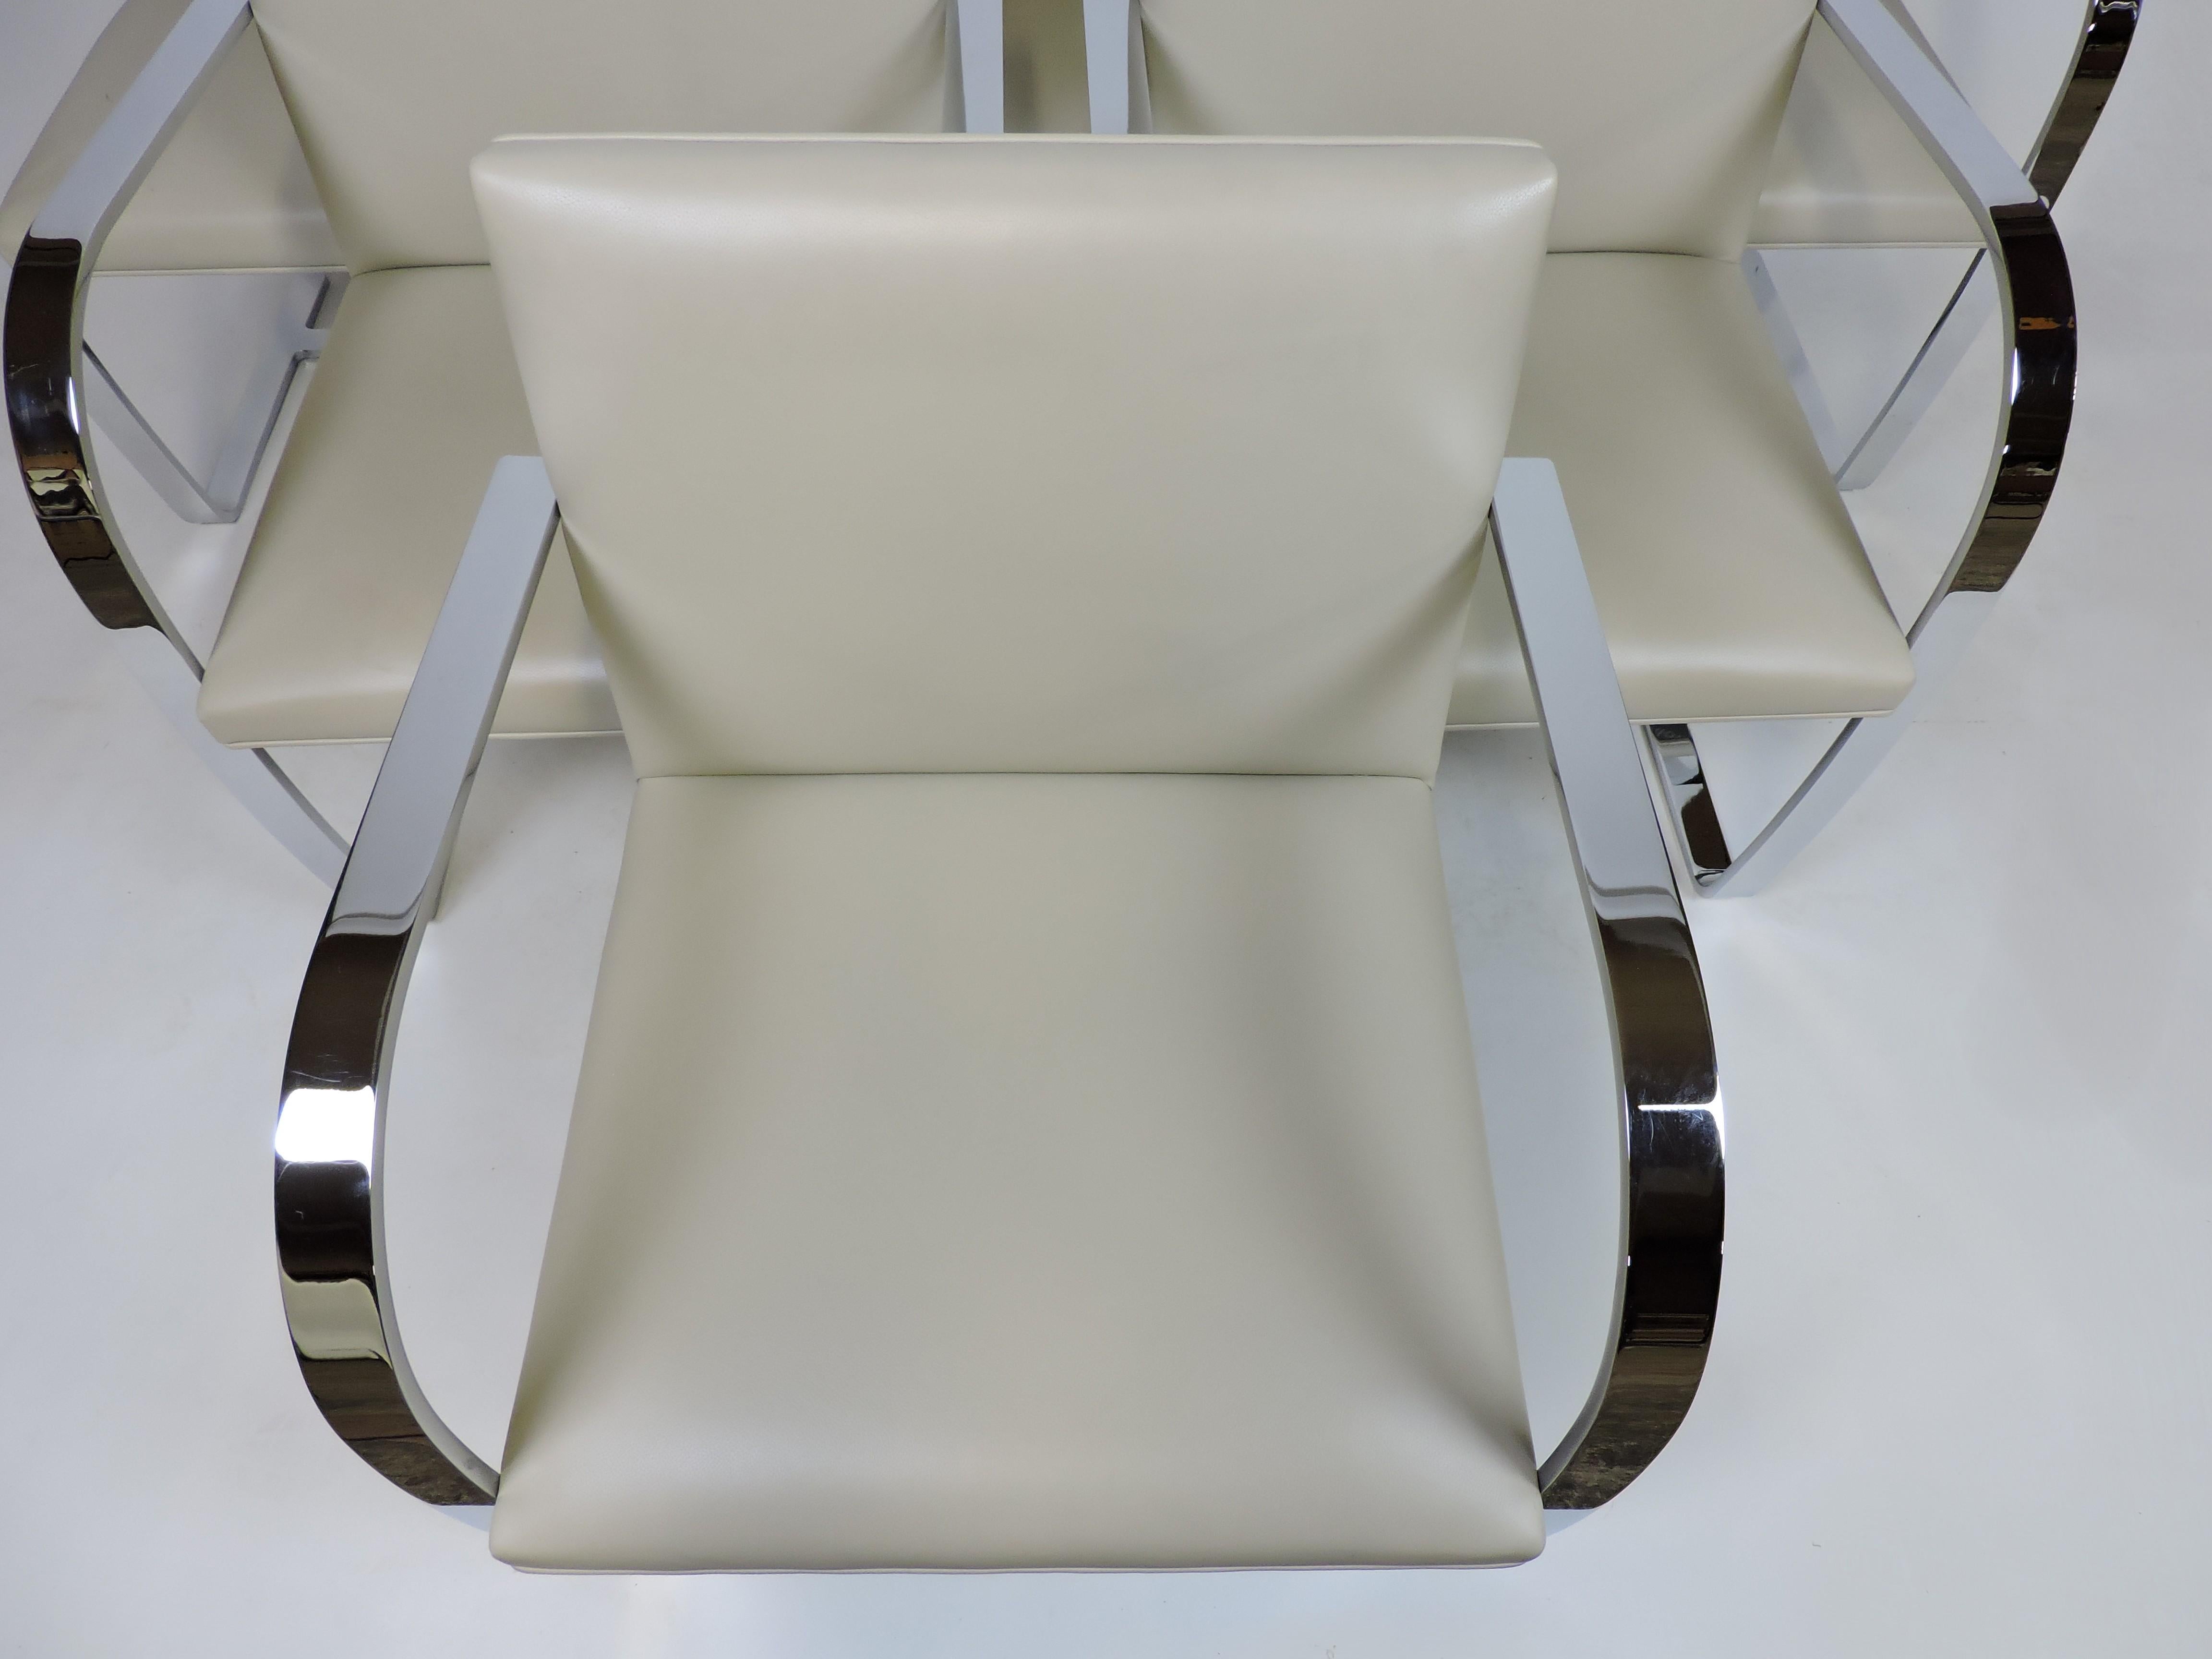 Set of six classic Brno chairs designed by Ludwig Mies van der Rohe in 1930 and manufactured in 2007 by Knoll. Simple and elegant cantilevered design that will never go out of style. These chairs have a steel frame with polished chrome plating, and